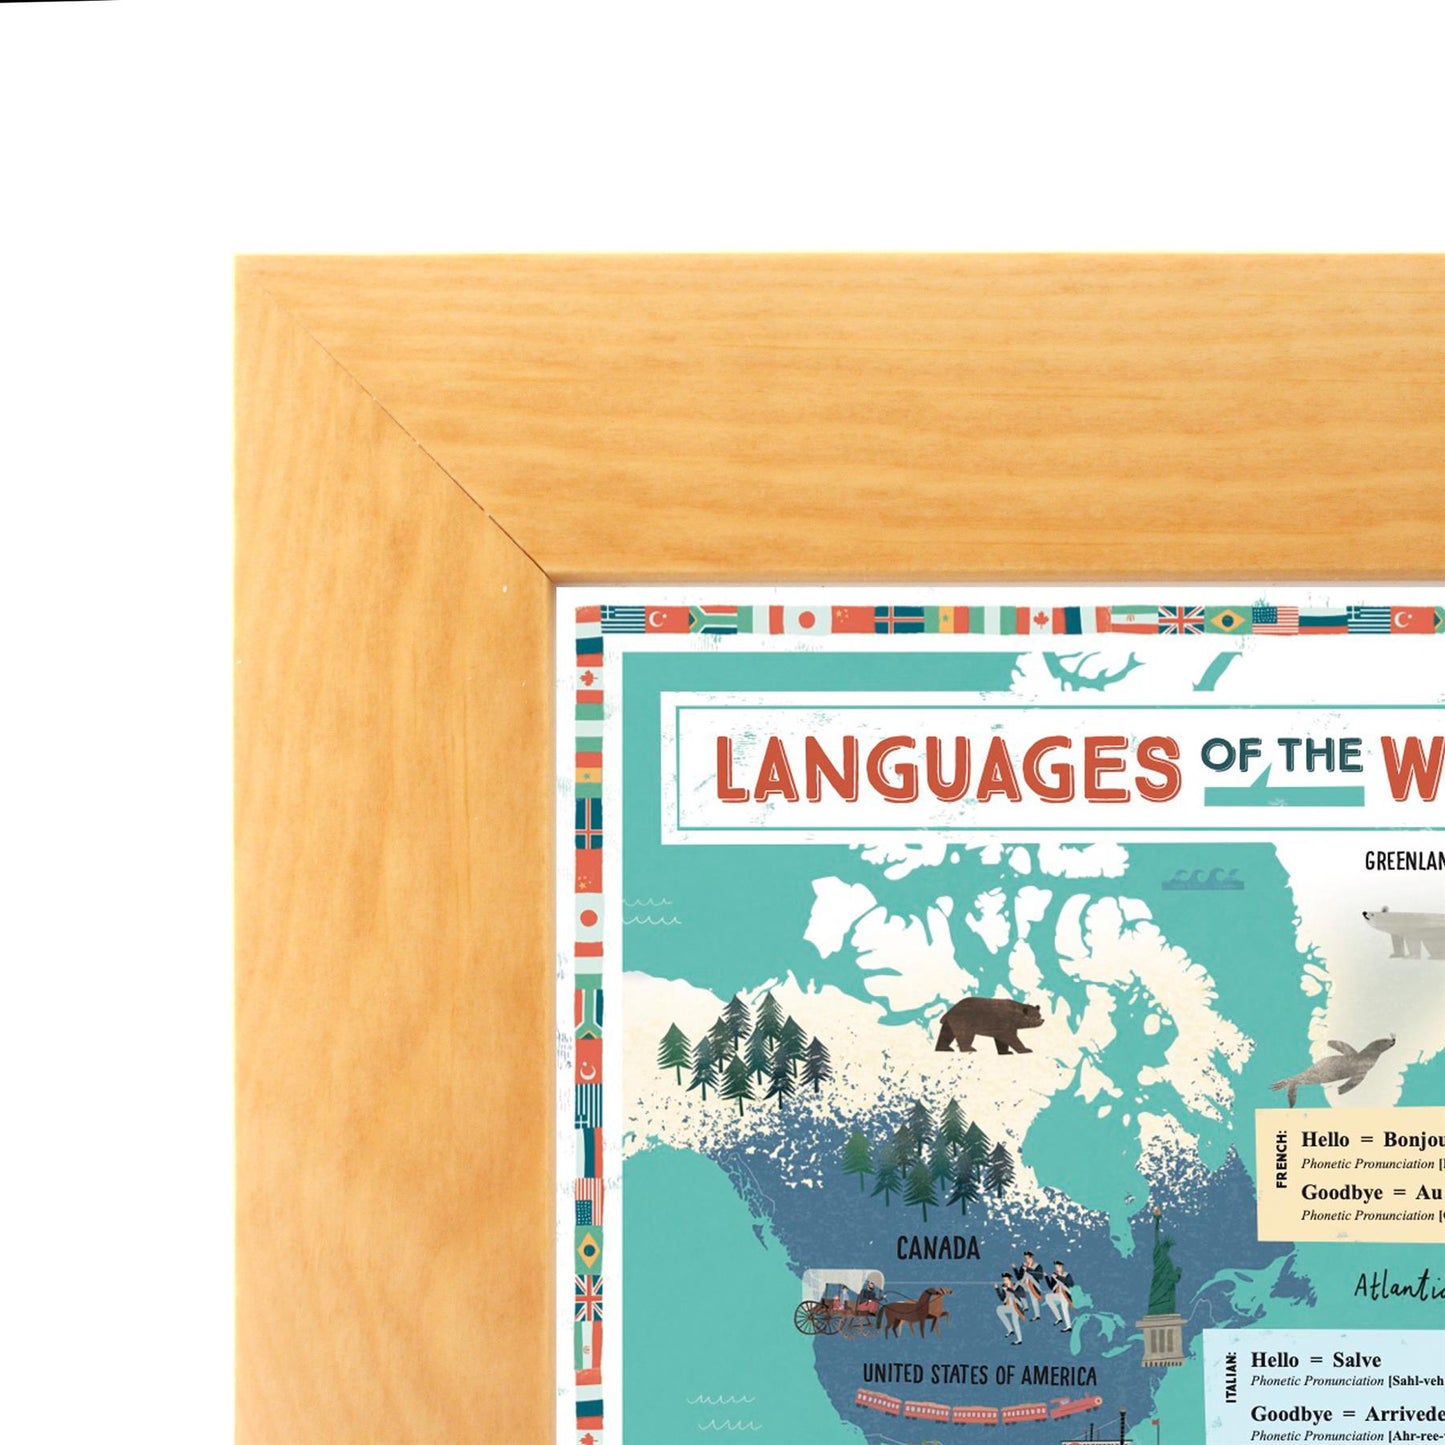 Languages Of The World Educational Wall Map - Prisoners of Geography